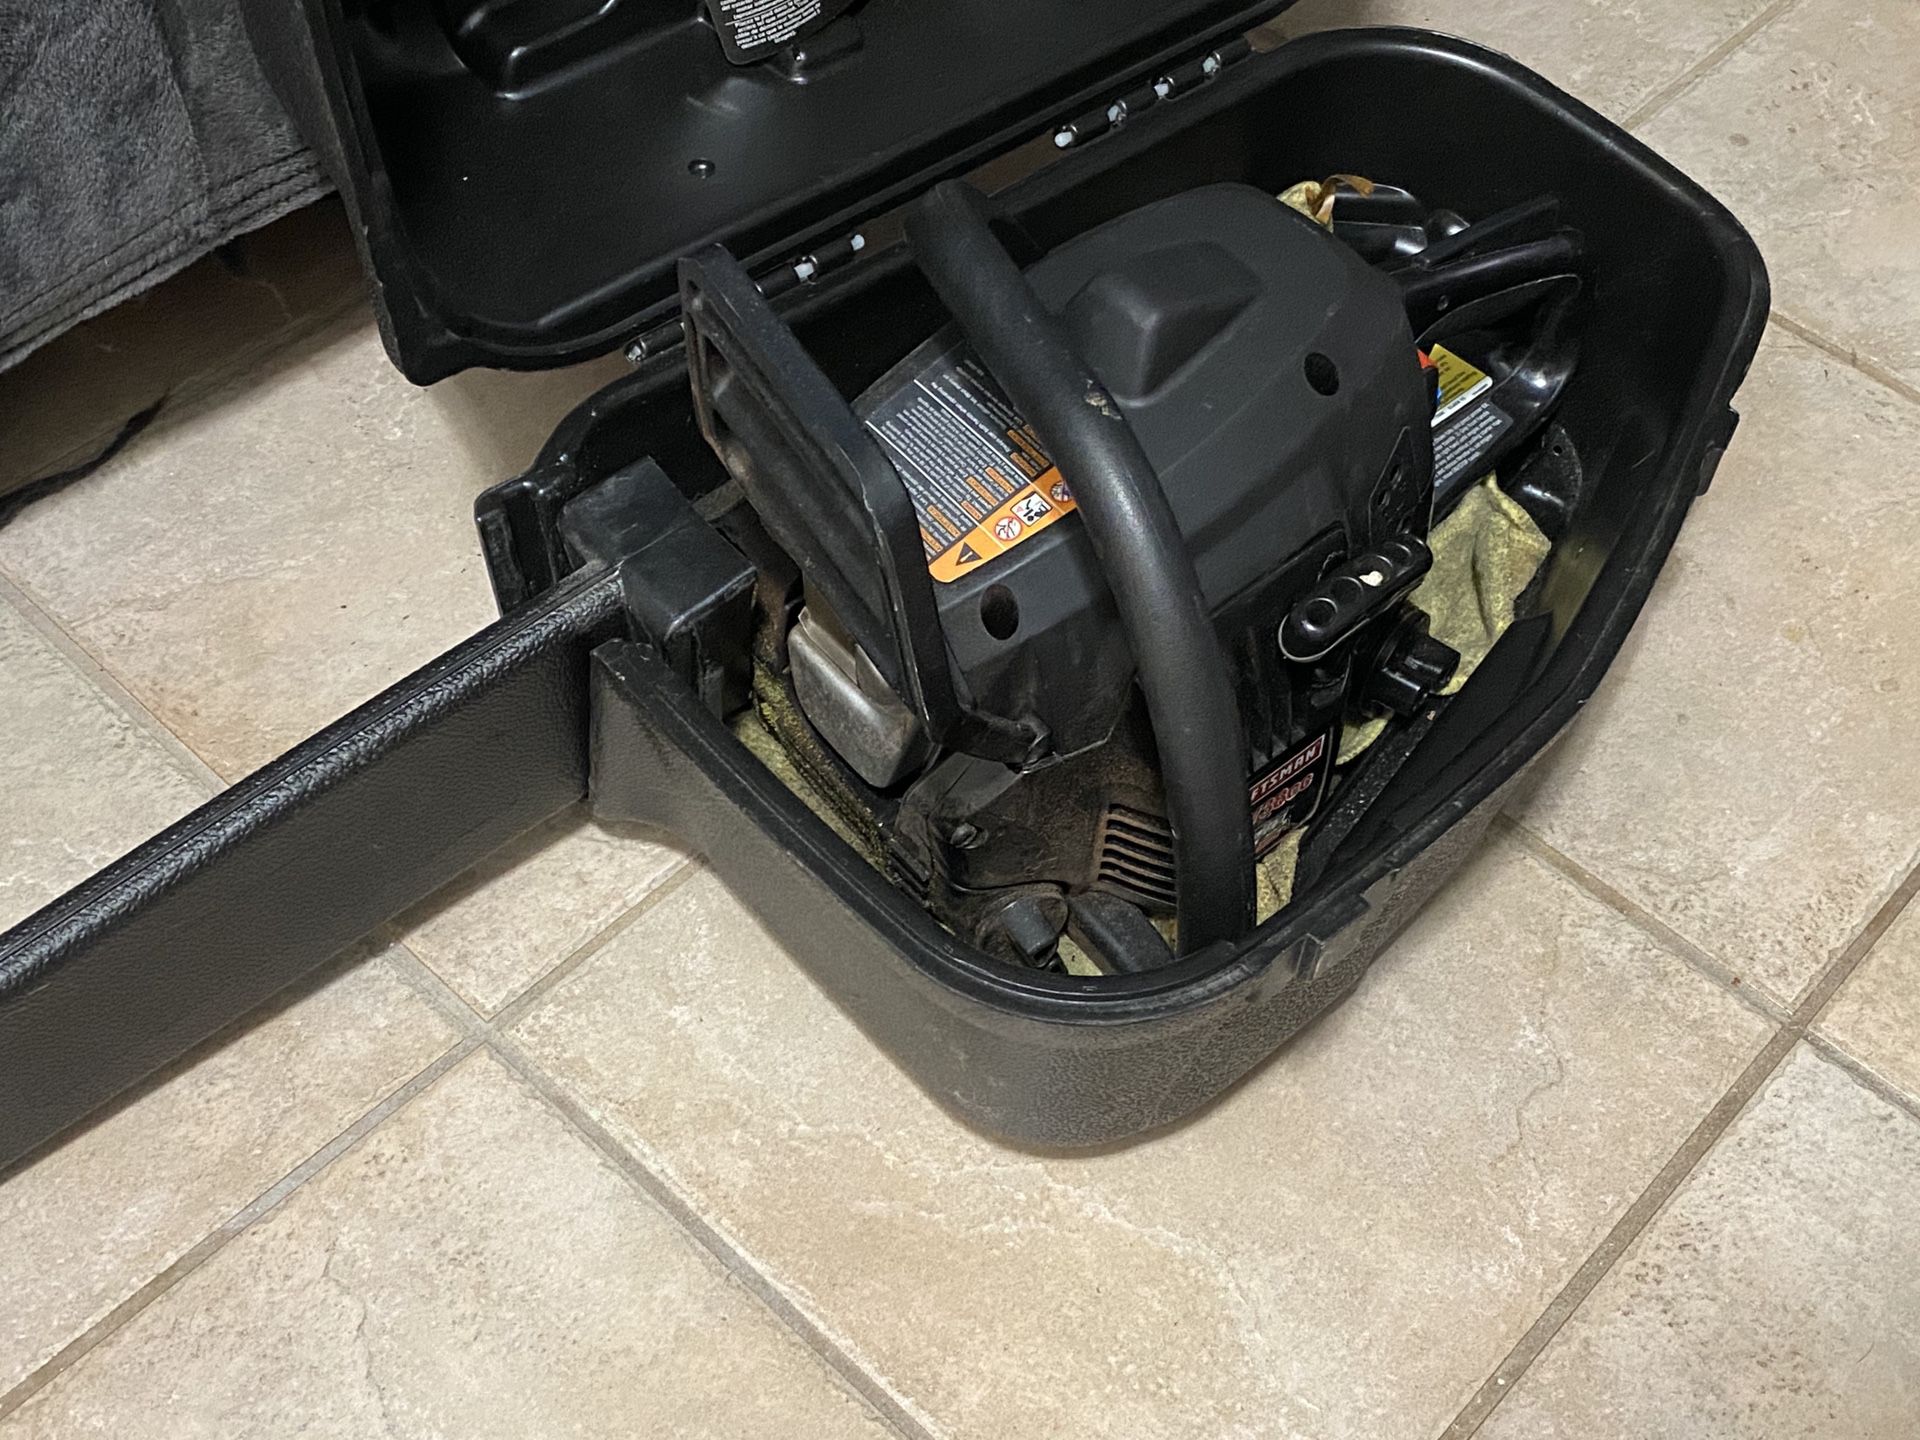 Craftsman 16" / 38cc Chainsaw, Gas powered, used, works, with case. Might need more gas added, might need new chain eventually. willing to meet nea